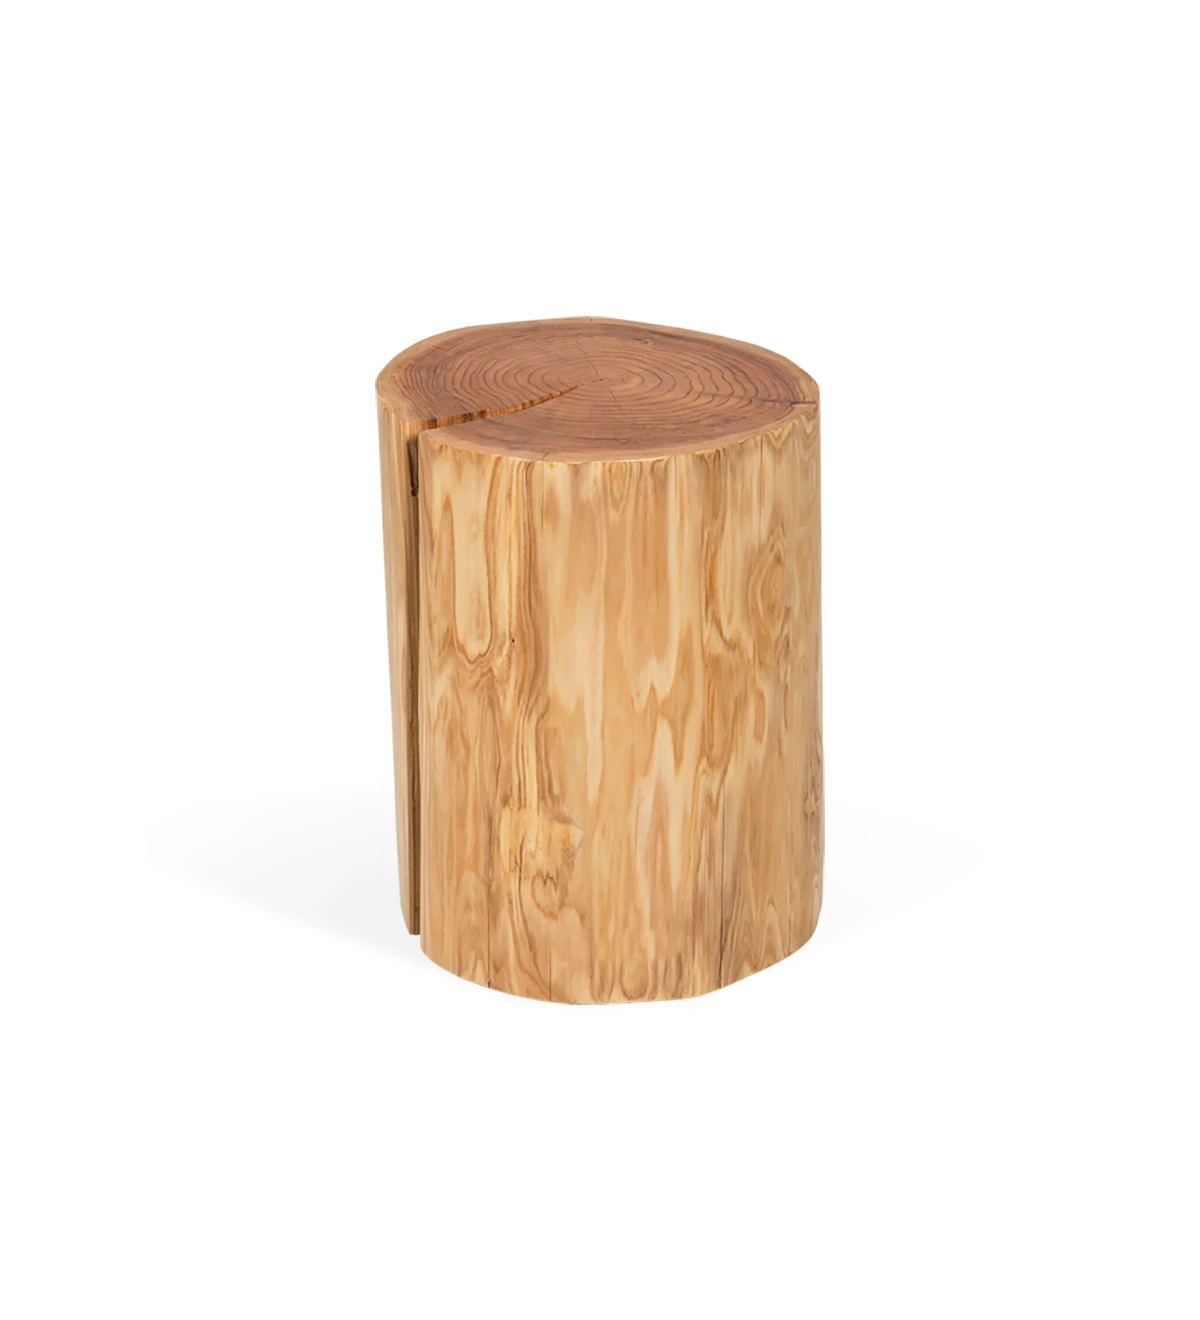 Trunk side table in natural cryptomeria wood, Ø 35 to 45 cm.